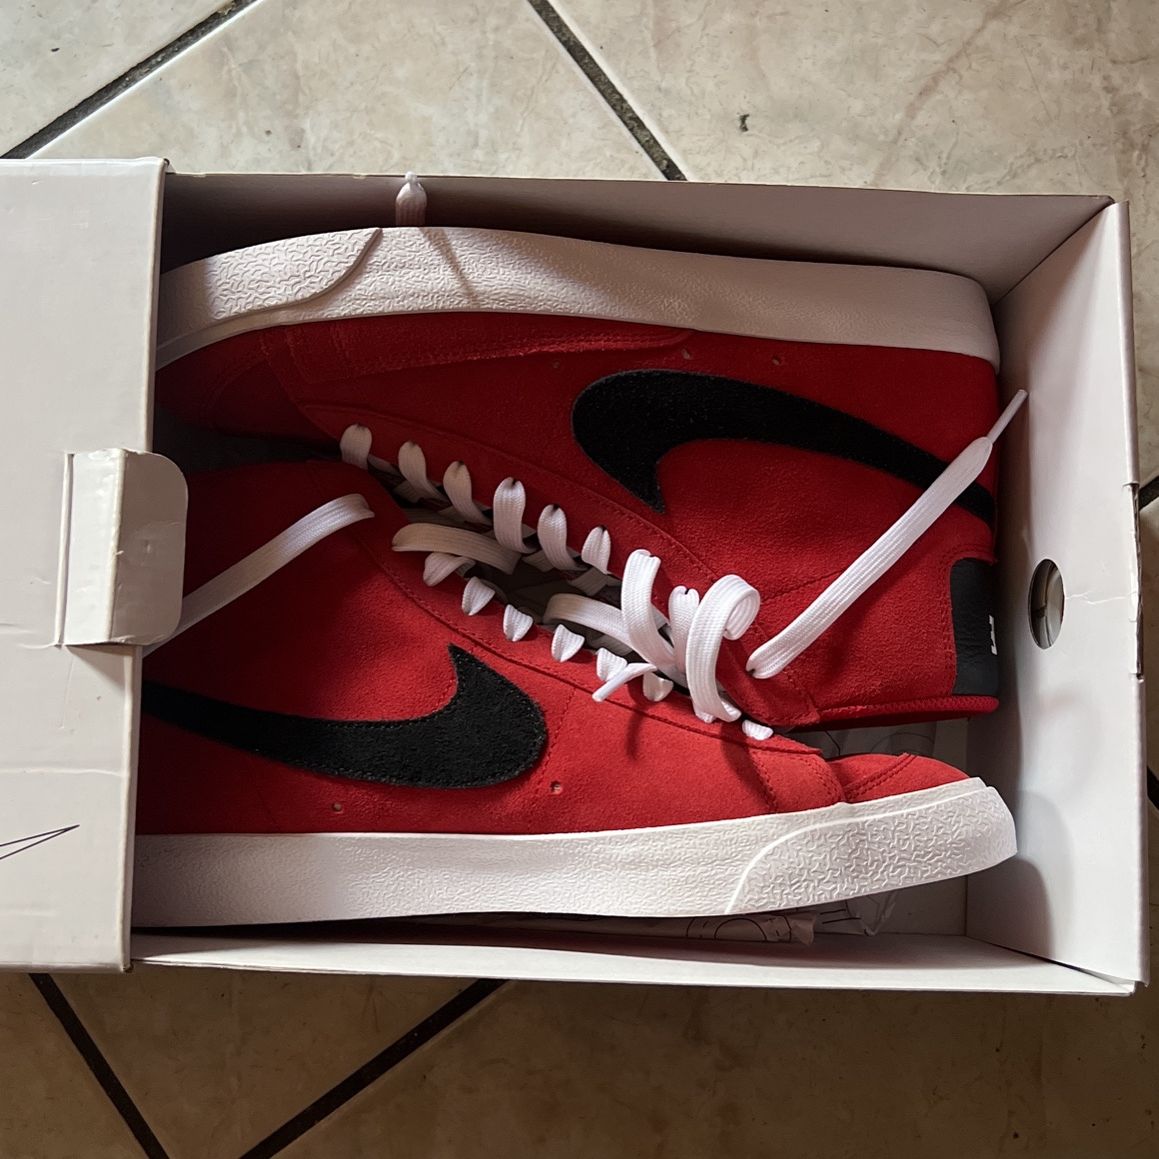 Nike New Never Used 